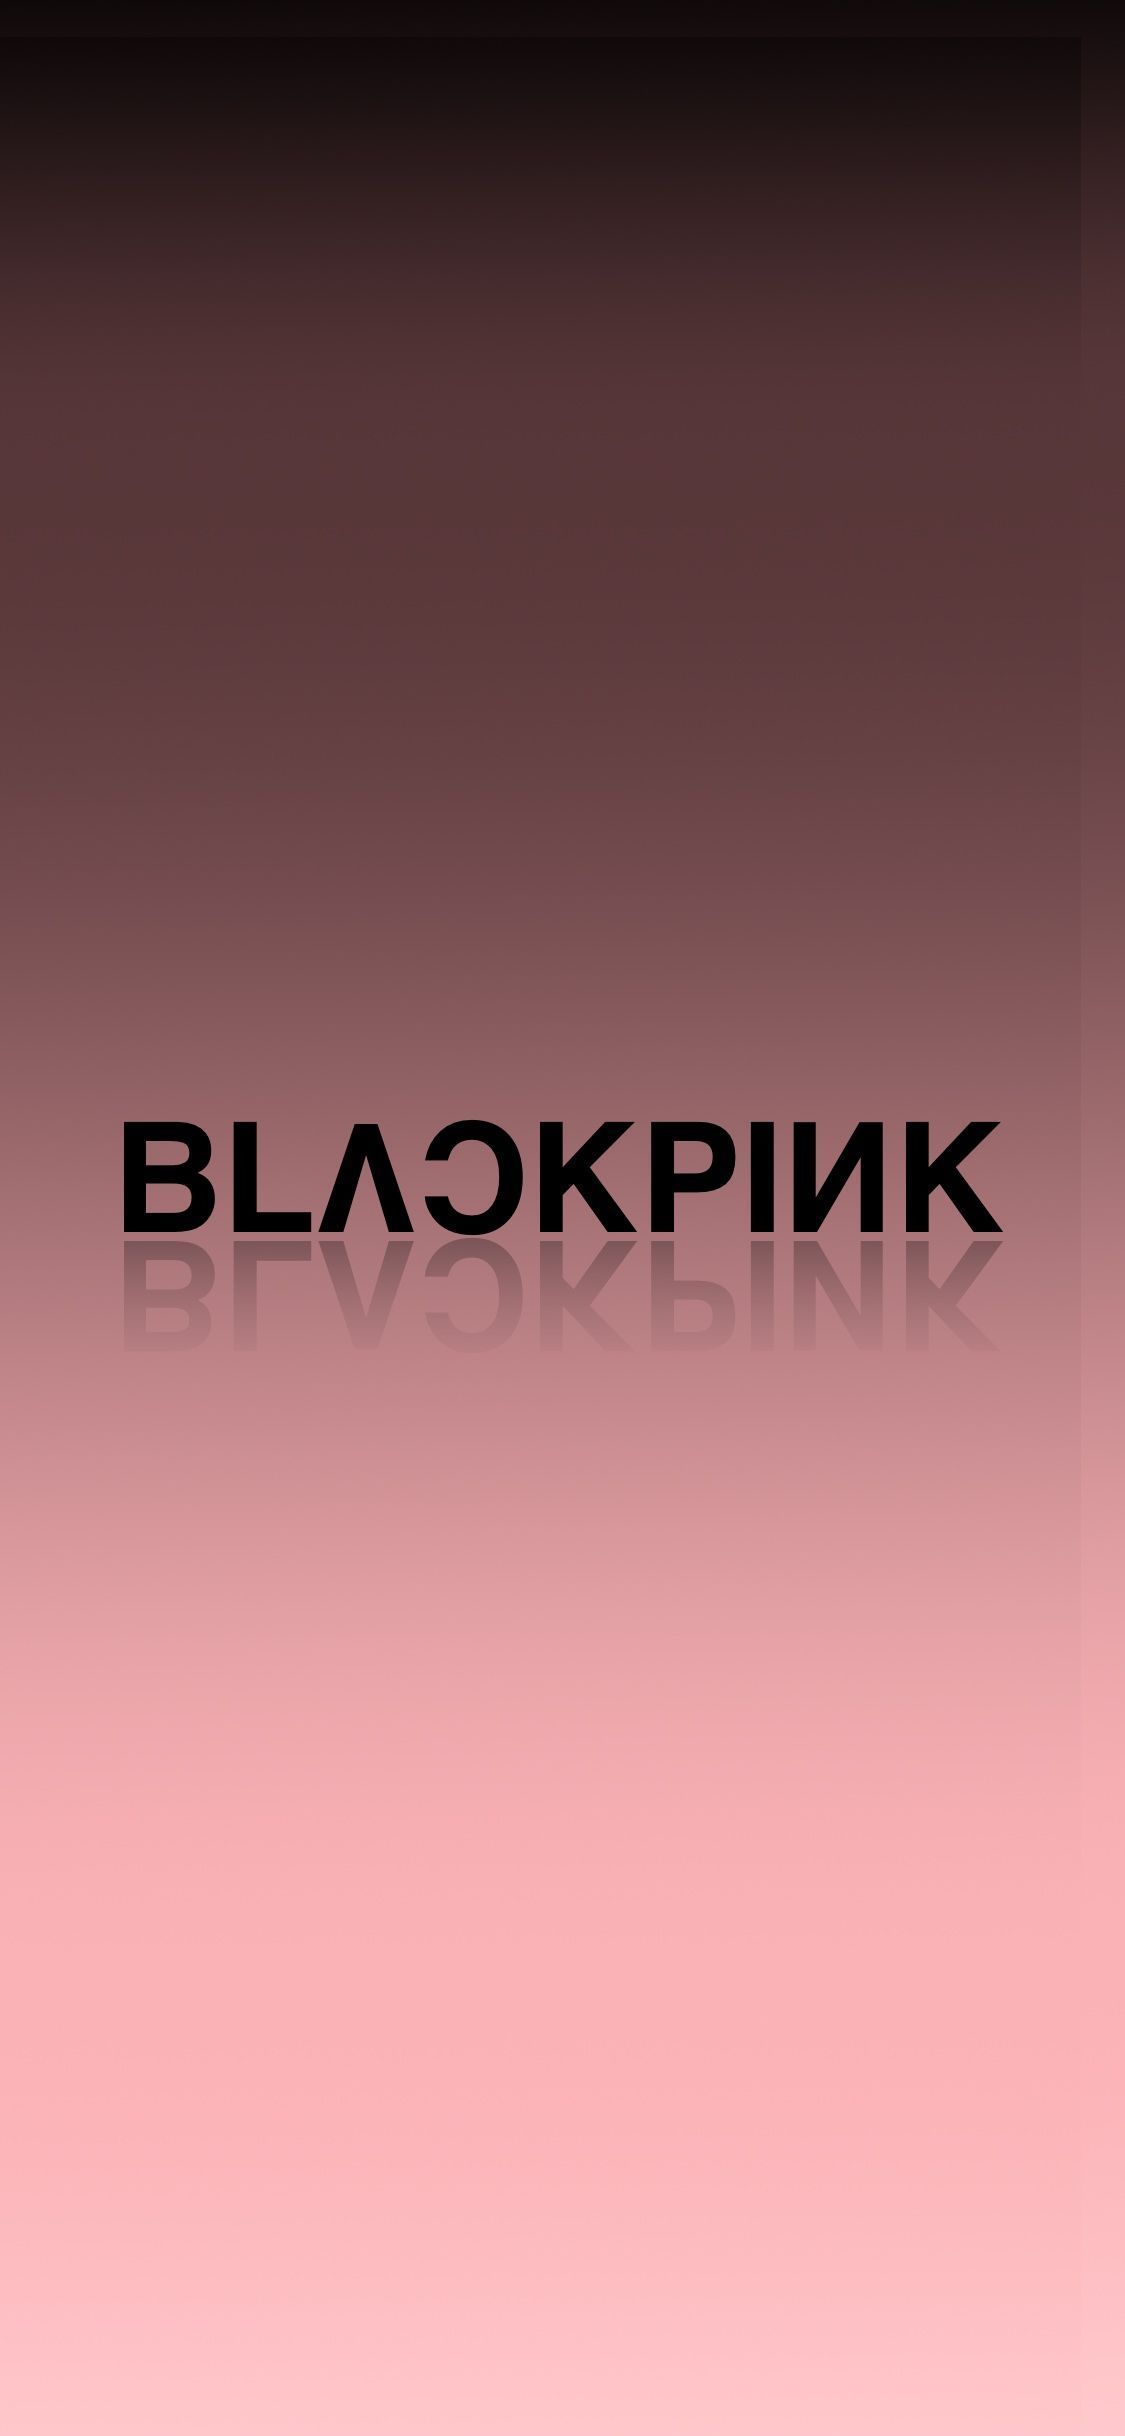 Blackpink wallpapers for iPhone xs max